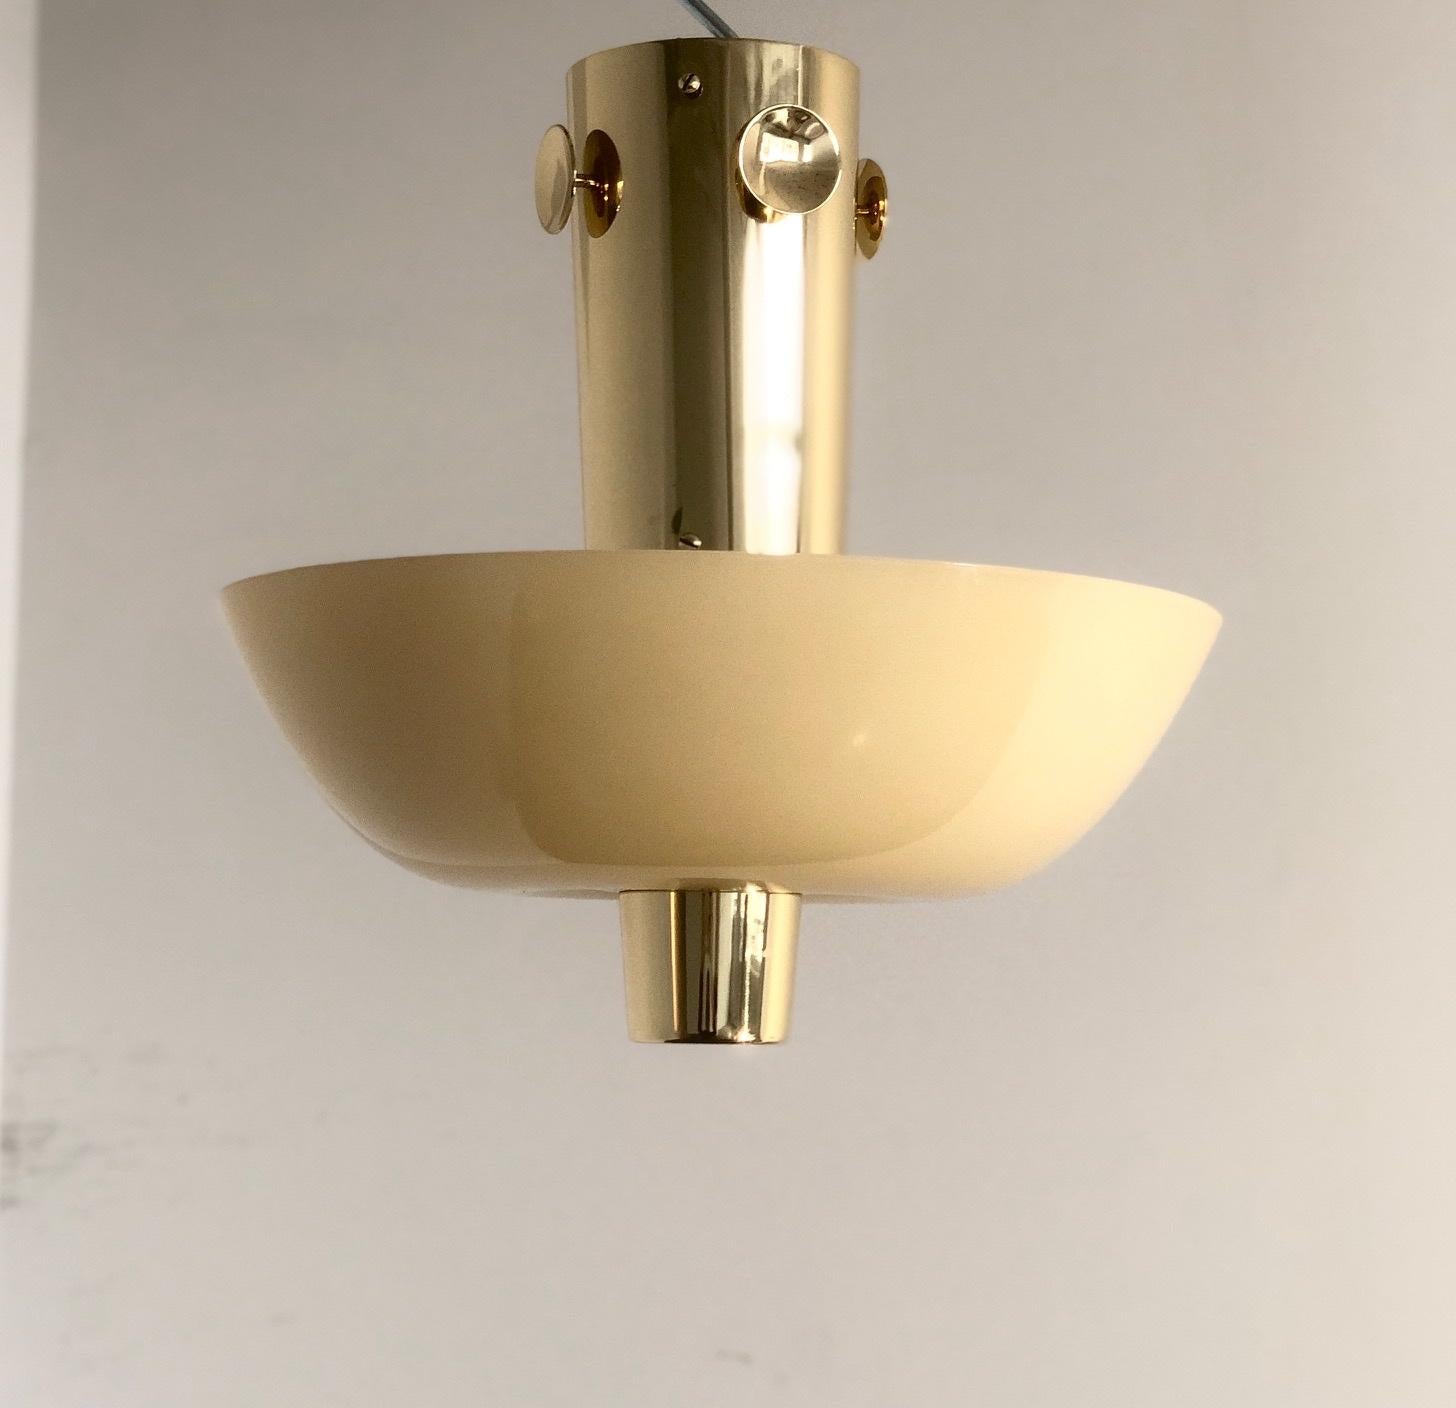 Finnish Ceiling Light by Paavo Tynell, Model 9052 / 2 available For Sale